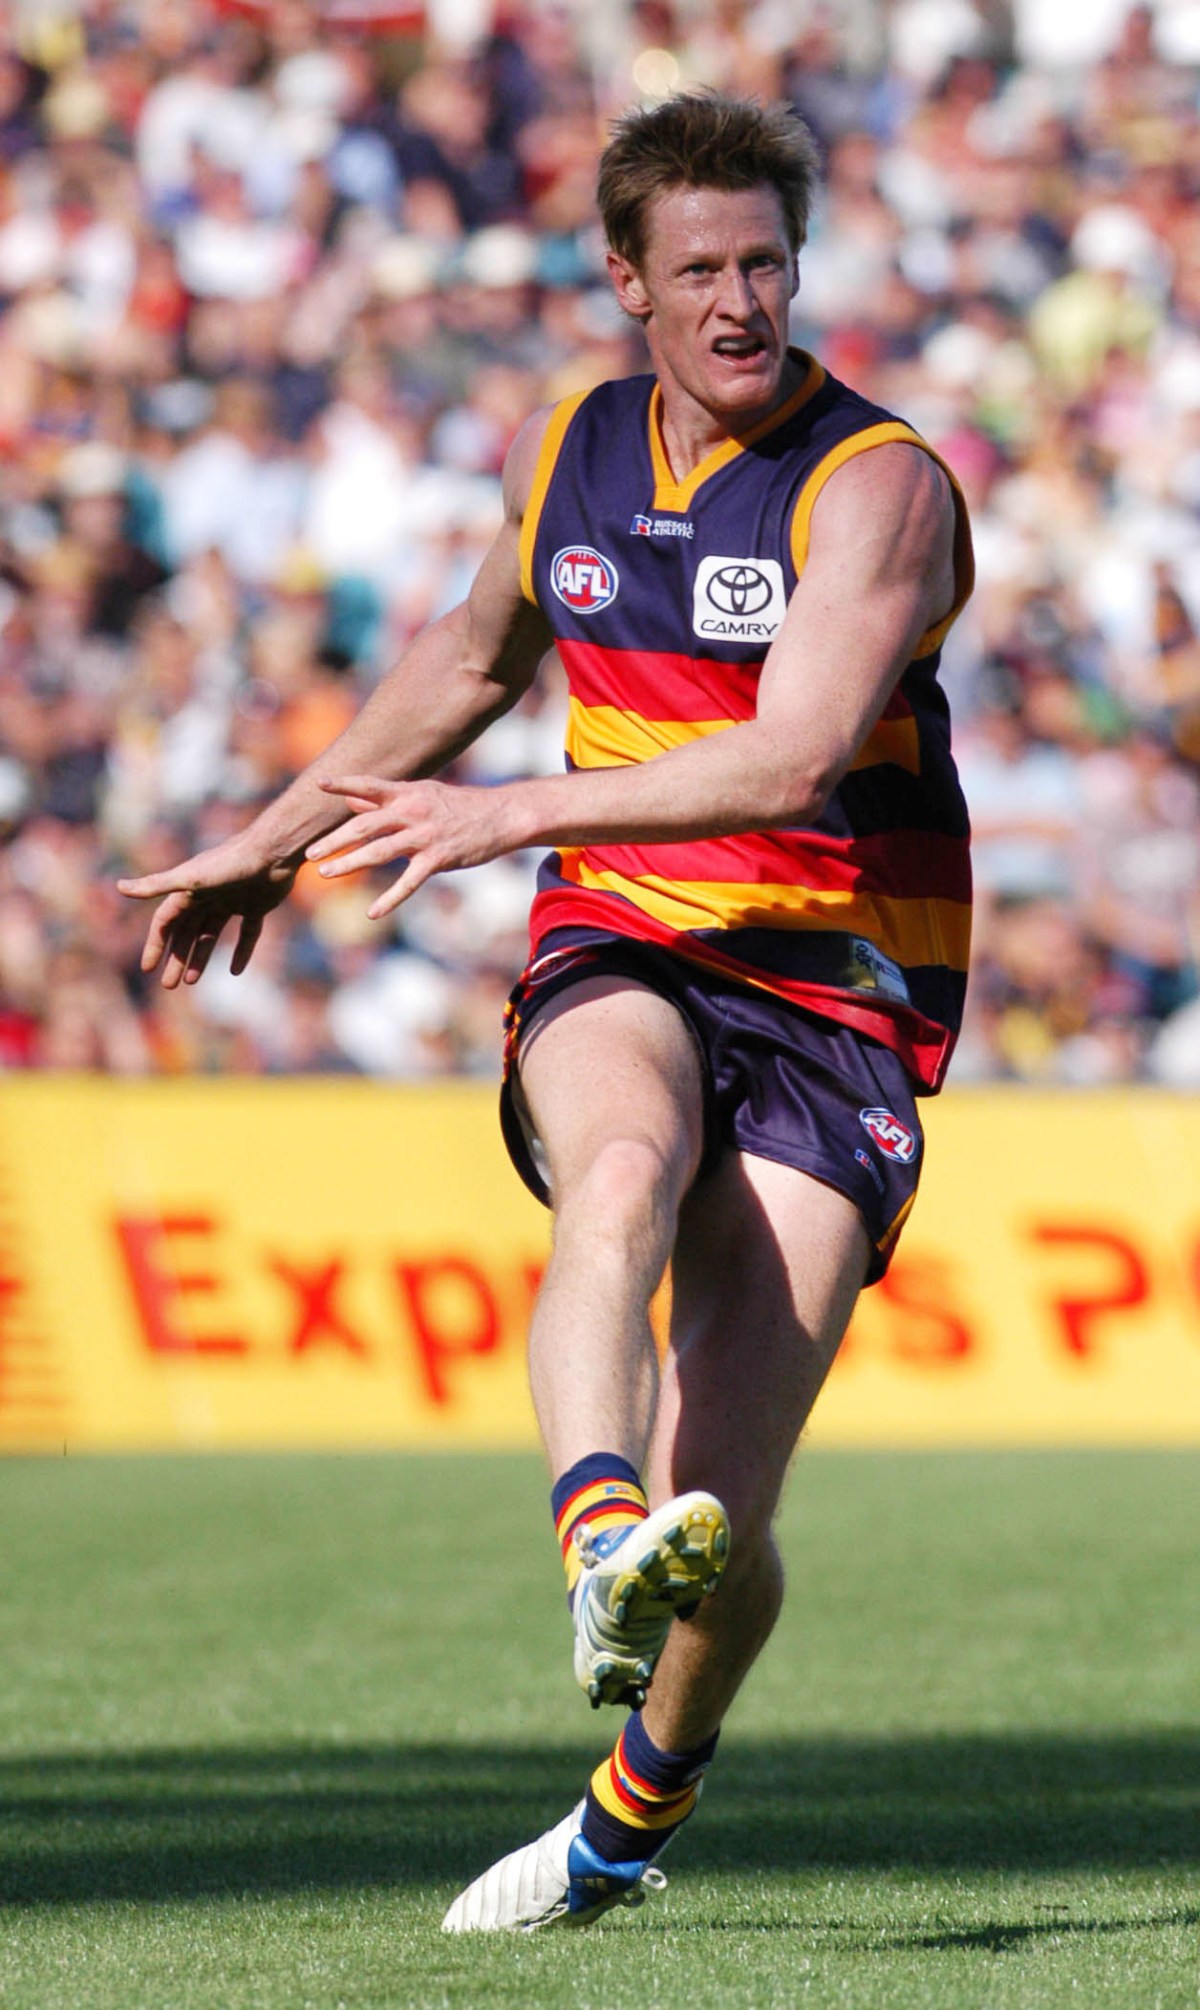 Adelaide, March 27, 2005. Adelaide Crows back Ben Hart in action after returning from injury against West Coast Eagles in their first round clash at AAMI Stadium, Adelaide, South Australia. ( AAP Image/Tom Miletic) NO ARCHIVING.